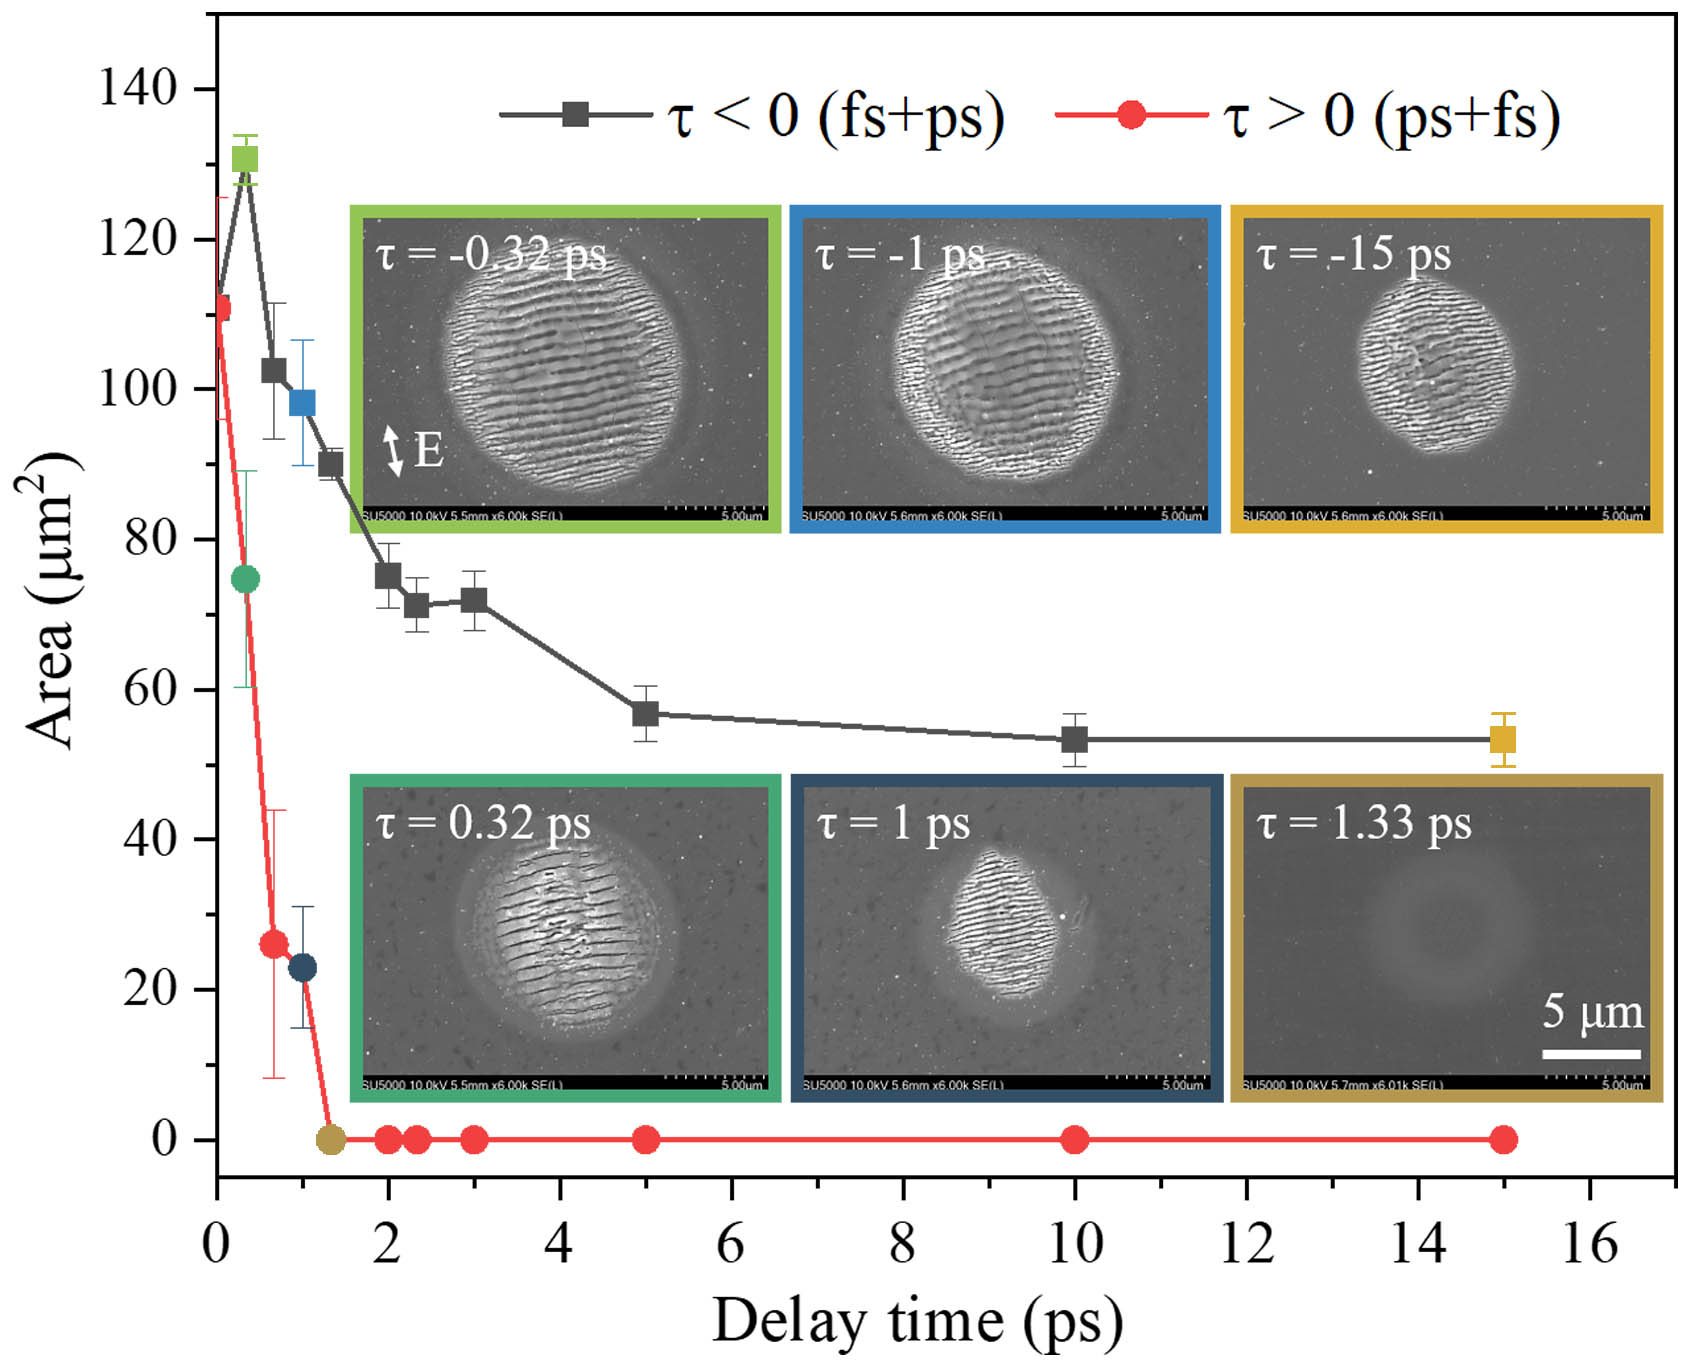 Induced ripple areas over the delay times. The markers in two curves correspond to different color blocks for the SEM insets.